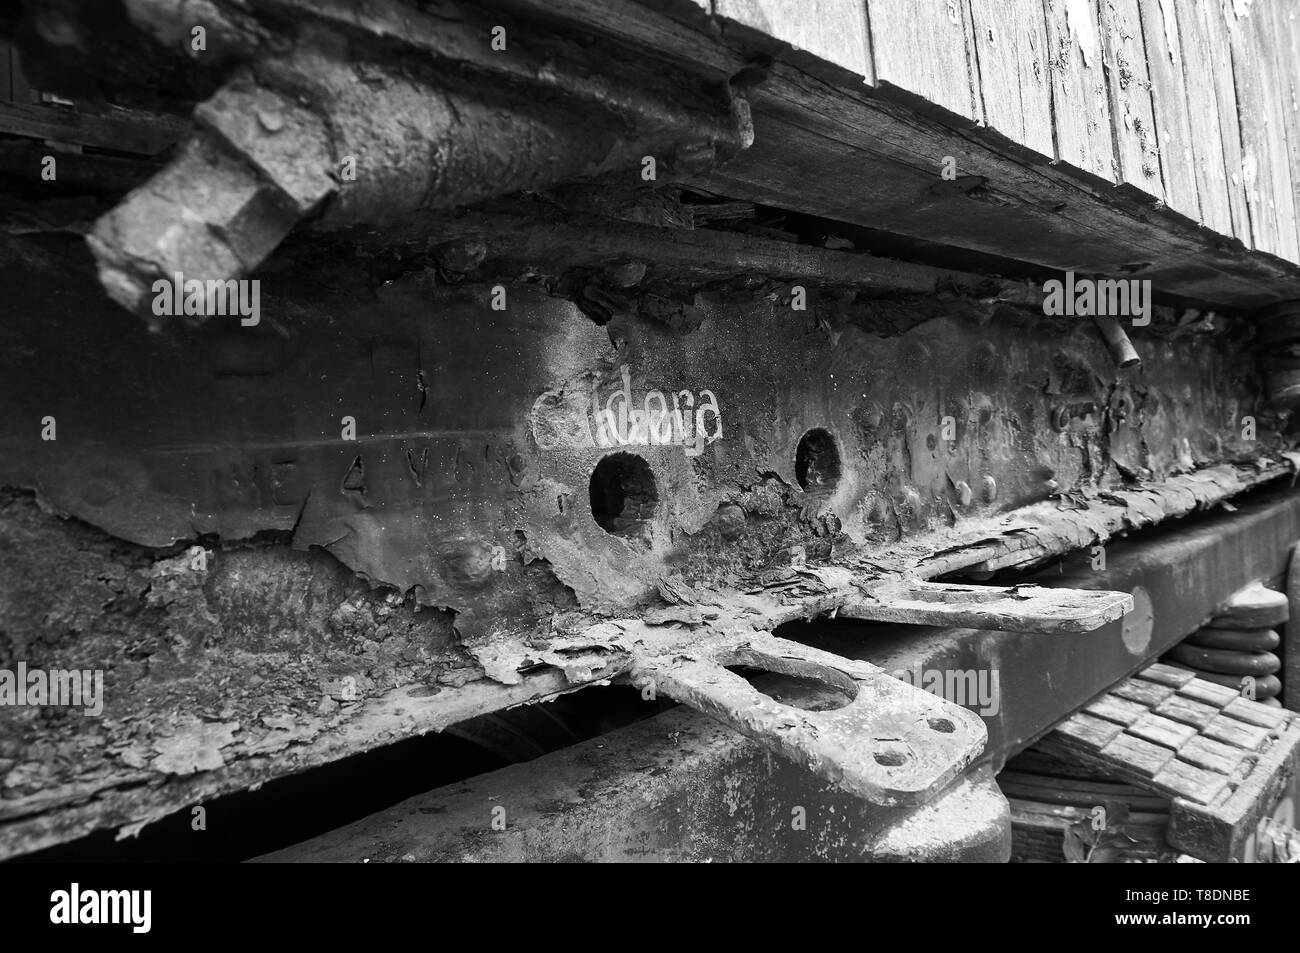 Detail of boiler intake in rusty train car at the abandoned Canfranc International railway station (Canfranc, Pyrenees, Huesca, Aragon,Spain) B&W vers Stock Photo